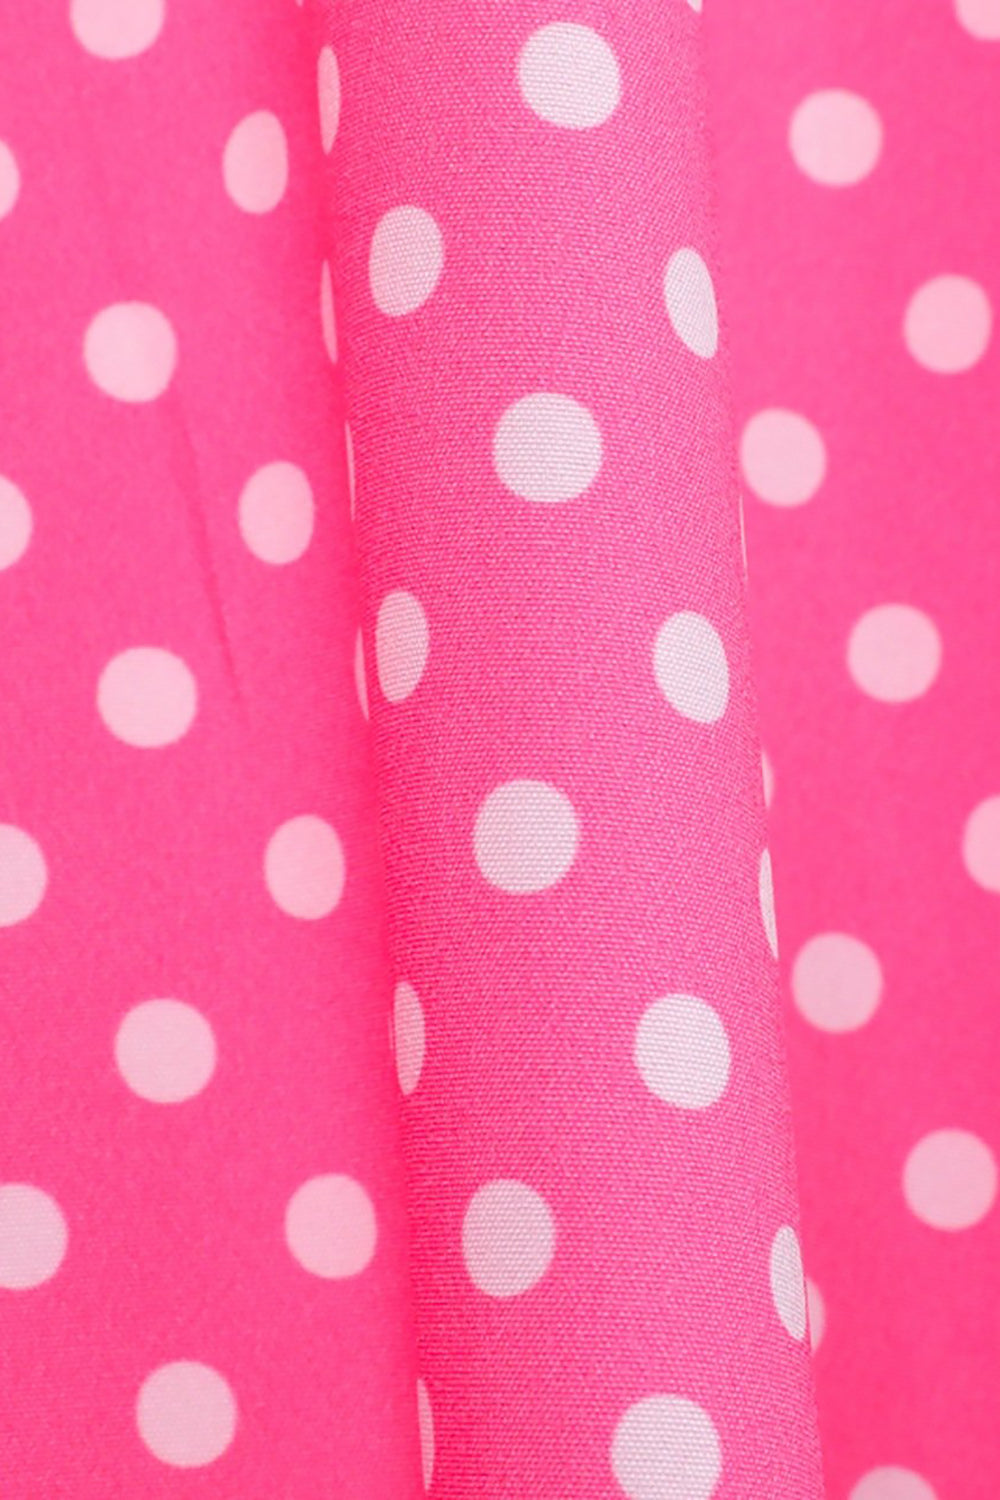 Pink Polka Dots Peter Pan Vintage Dress With Buttons